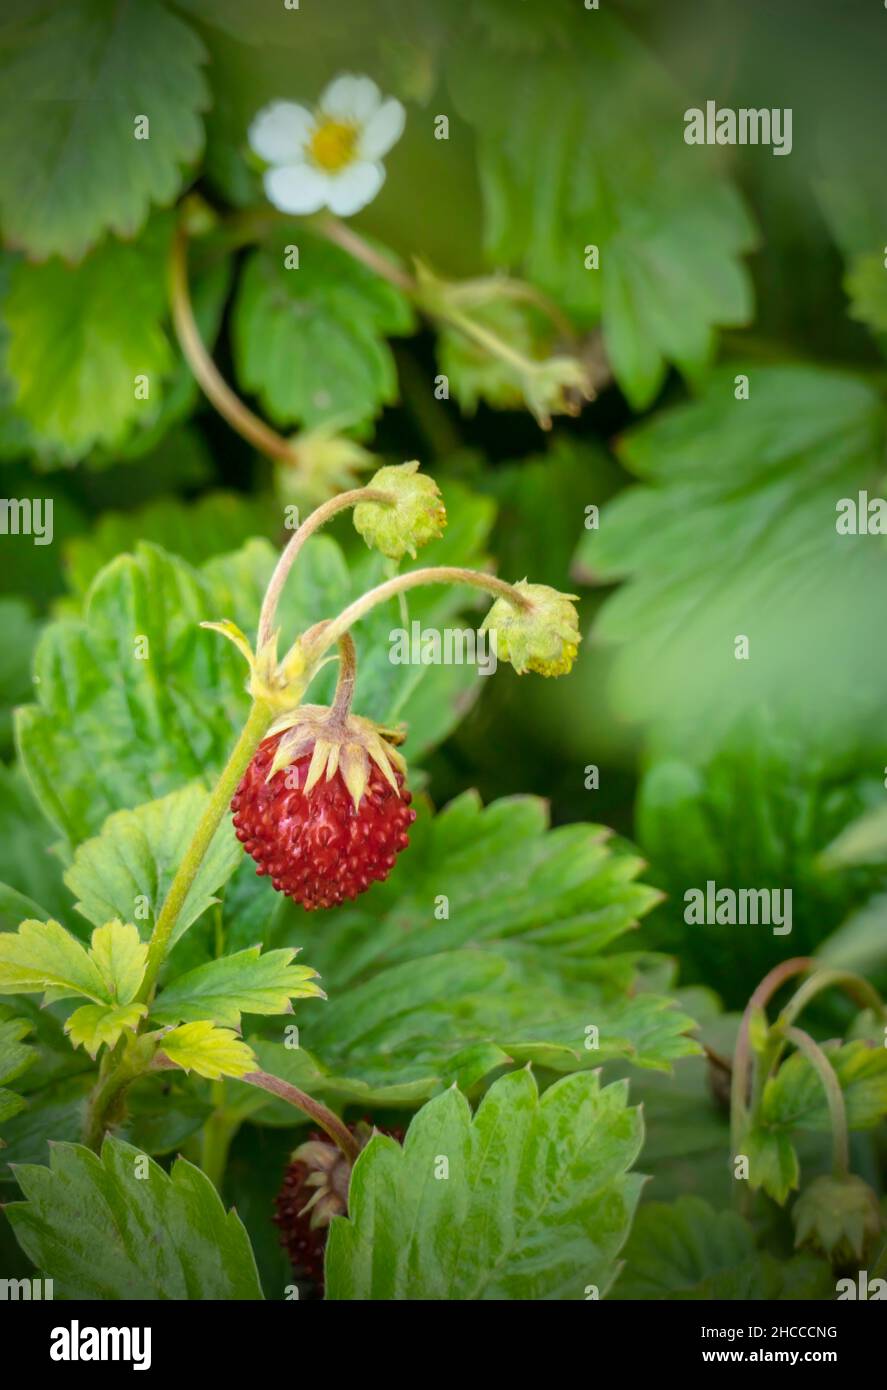 Flowering and fruiting of wild strawberries on a summer lawn Stock Photo